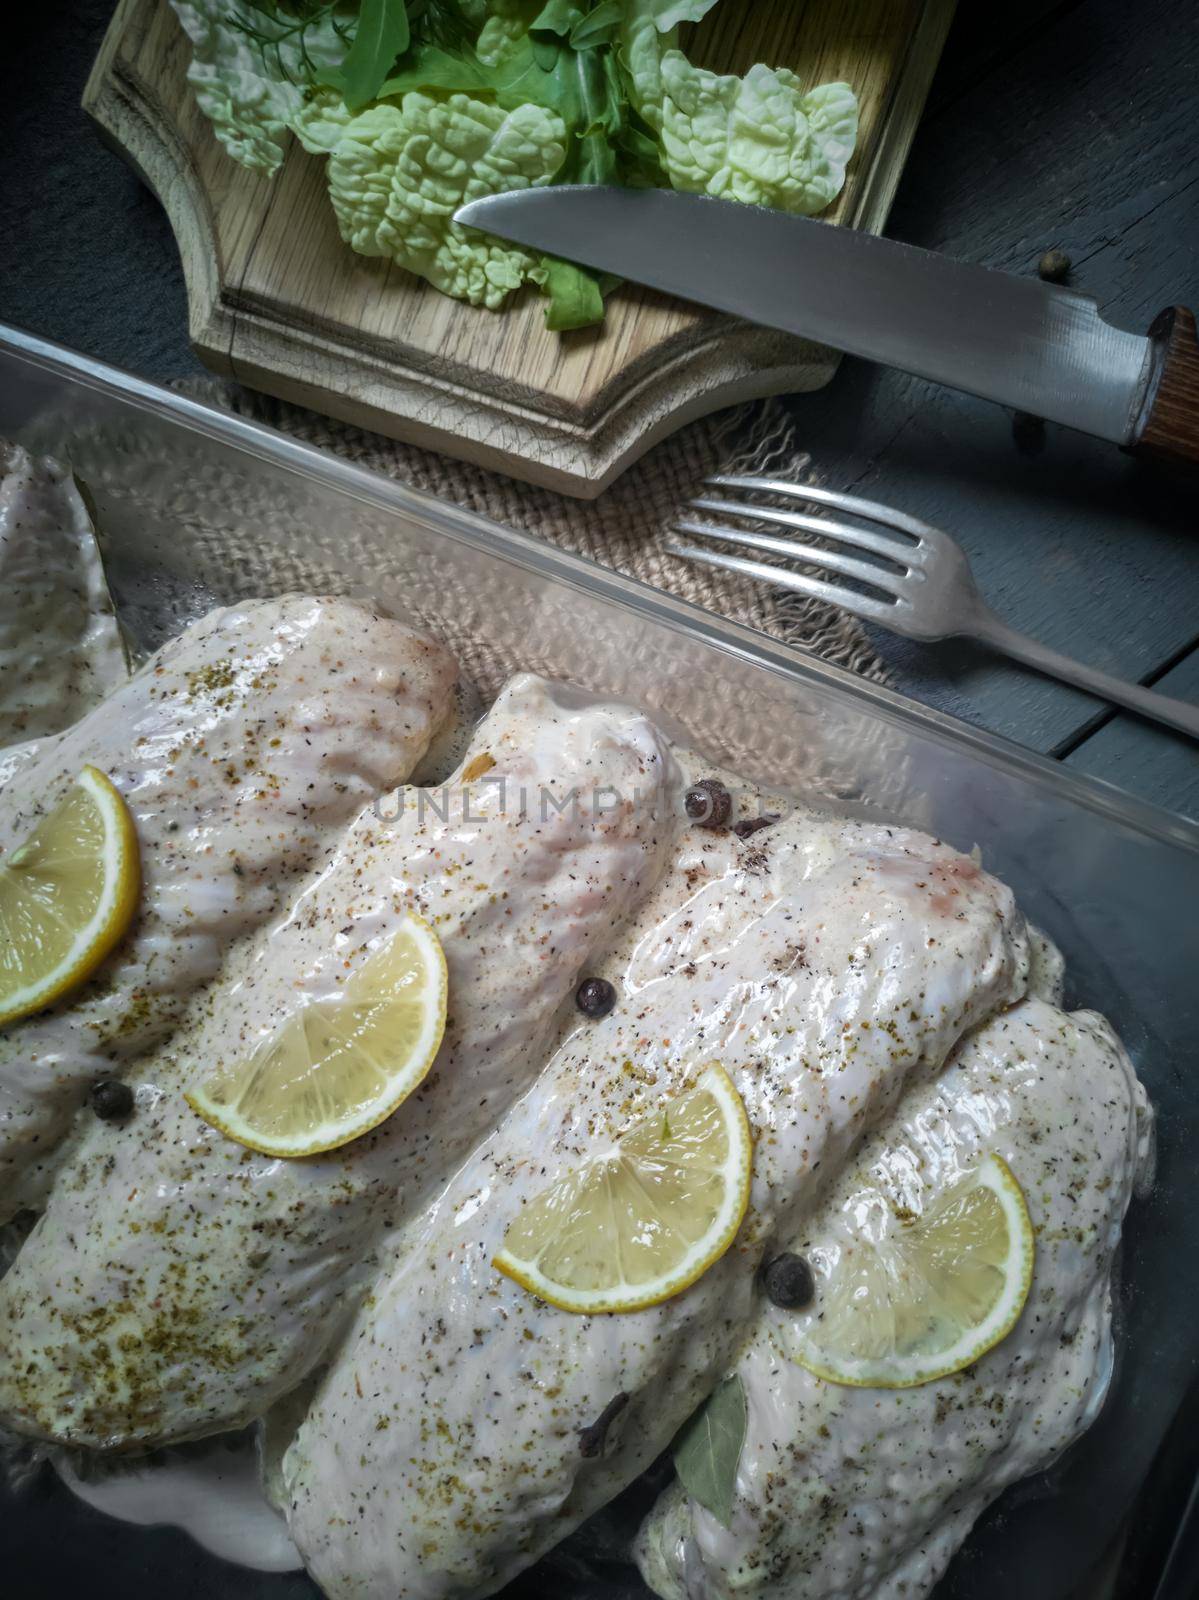 Marinated Turkey wings in a tray on a wooden table, prepared for roasting in the oven. There are spices and herbs nearby.